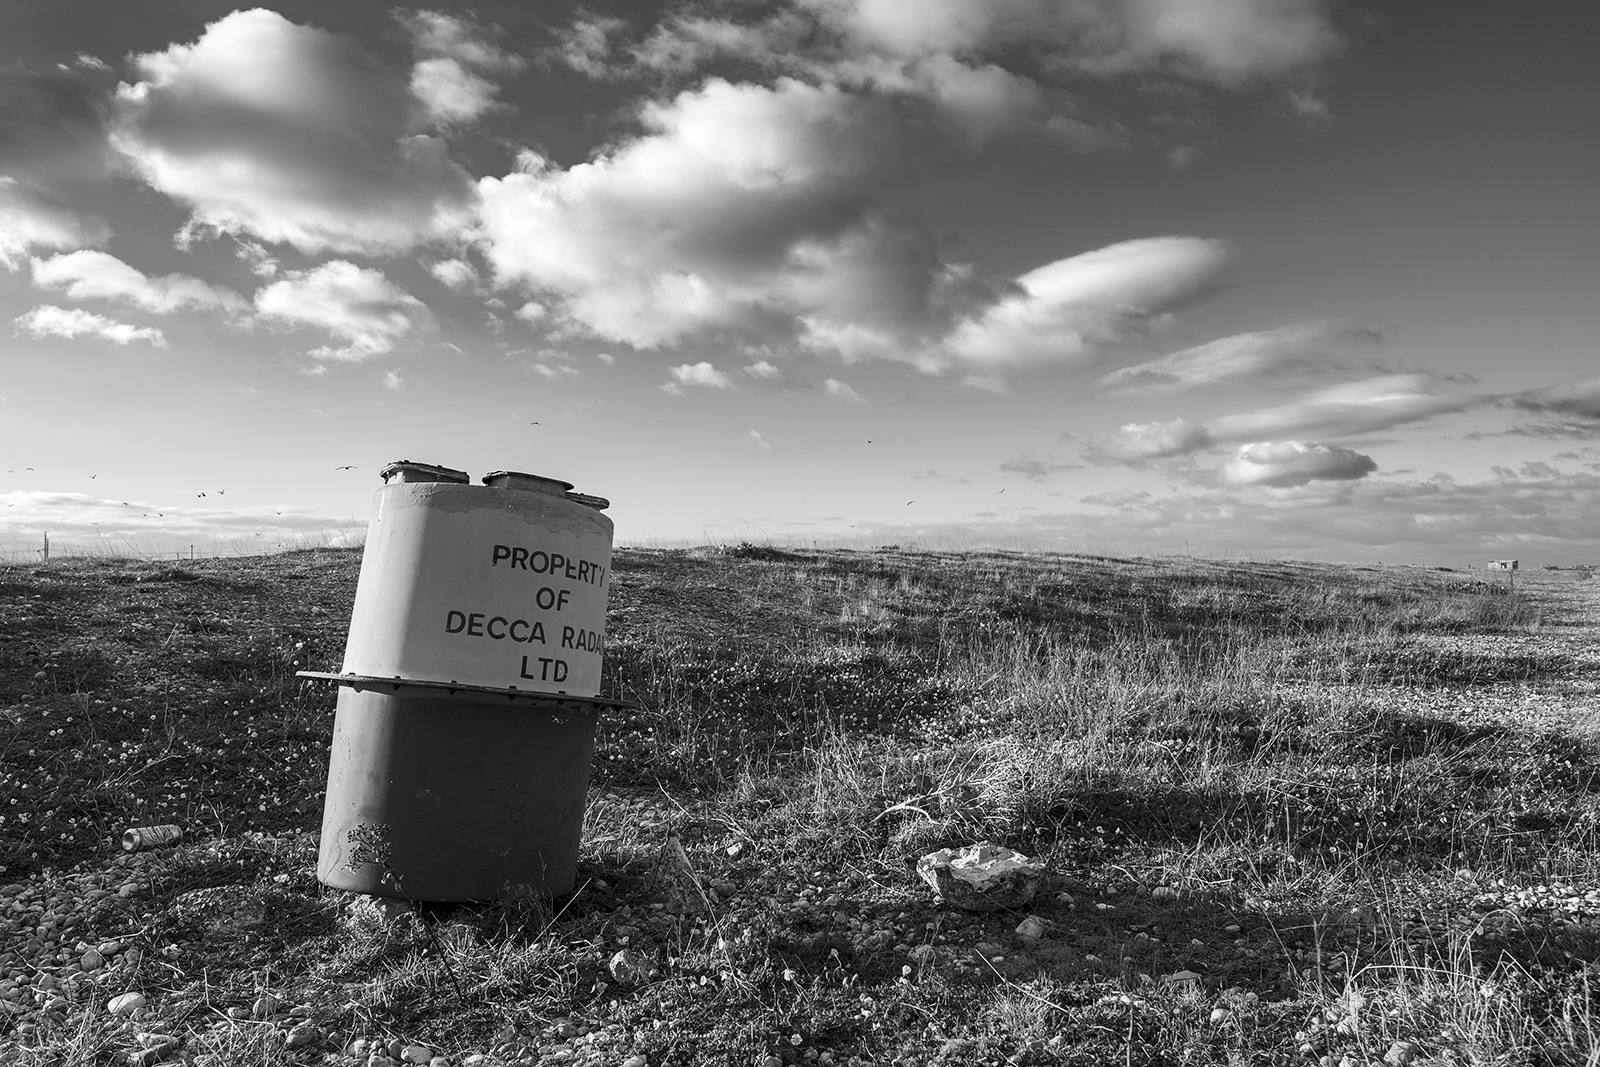 abandoned Decca radar buoy on beach with dead grass and dramatic clouds in sky, Dungeness Kent UK, black and white monochrome landscape portrait © P. Maton 2018 eyeteeth.net